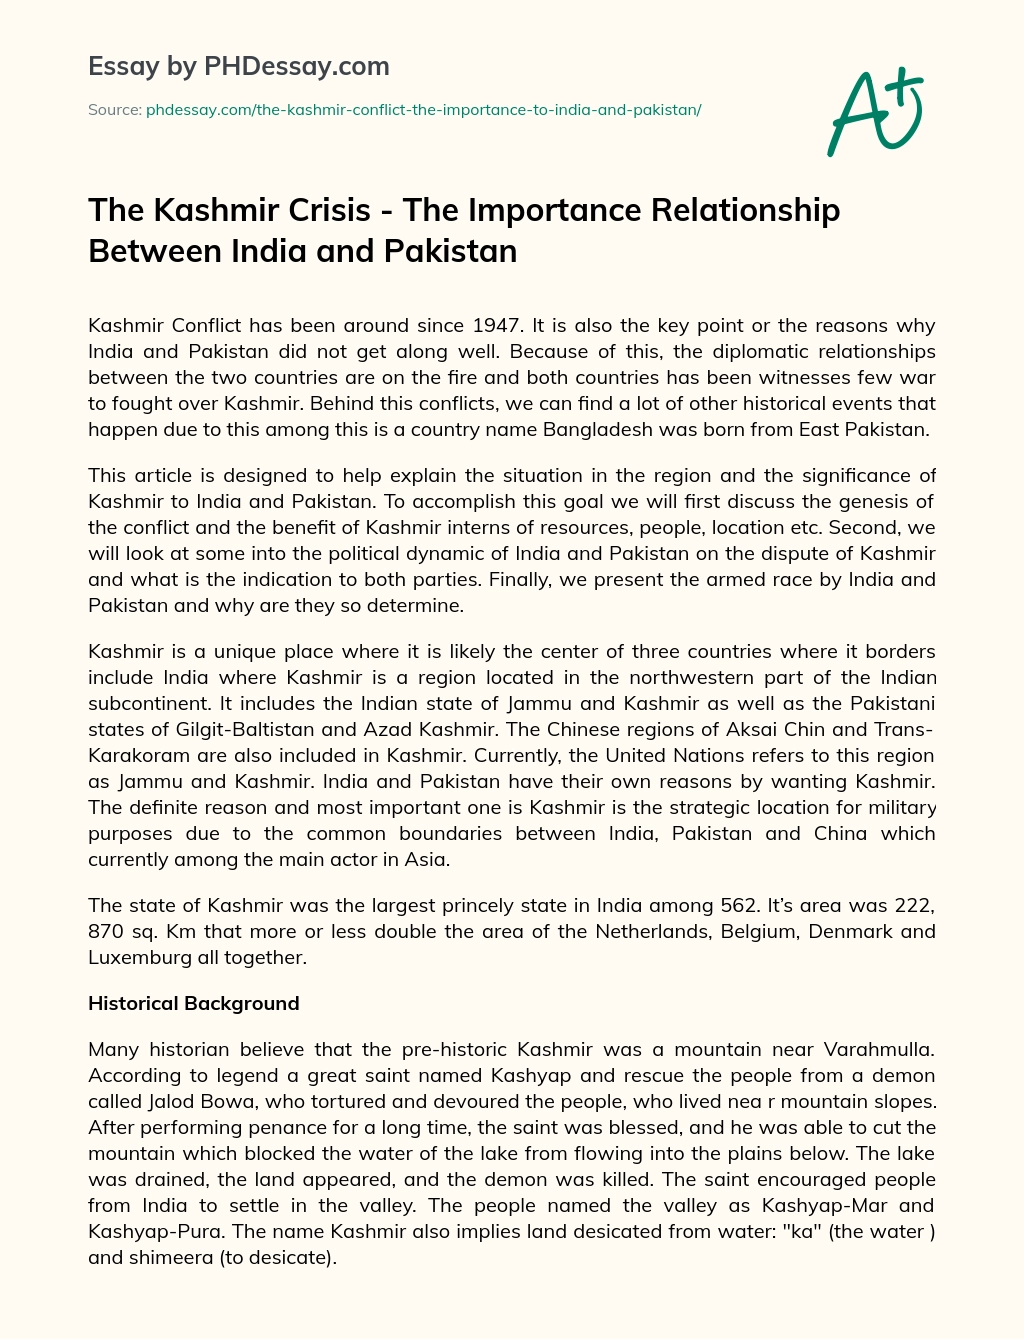 The Kashmir Crisis – The Importance Relationship Between India and Pakistan essay